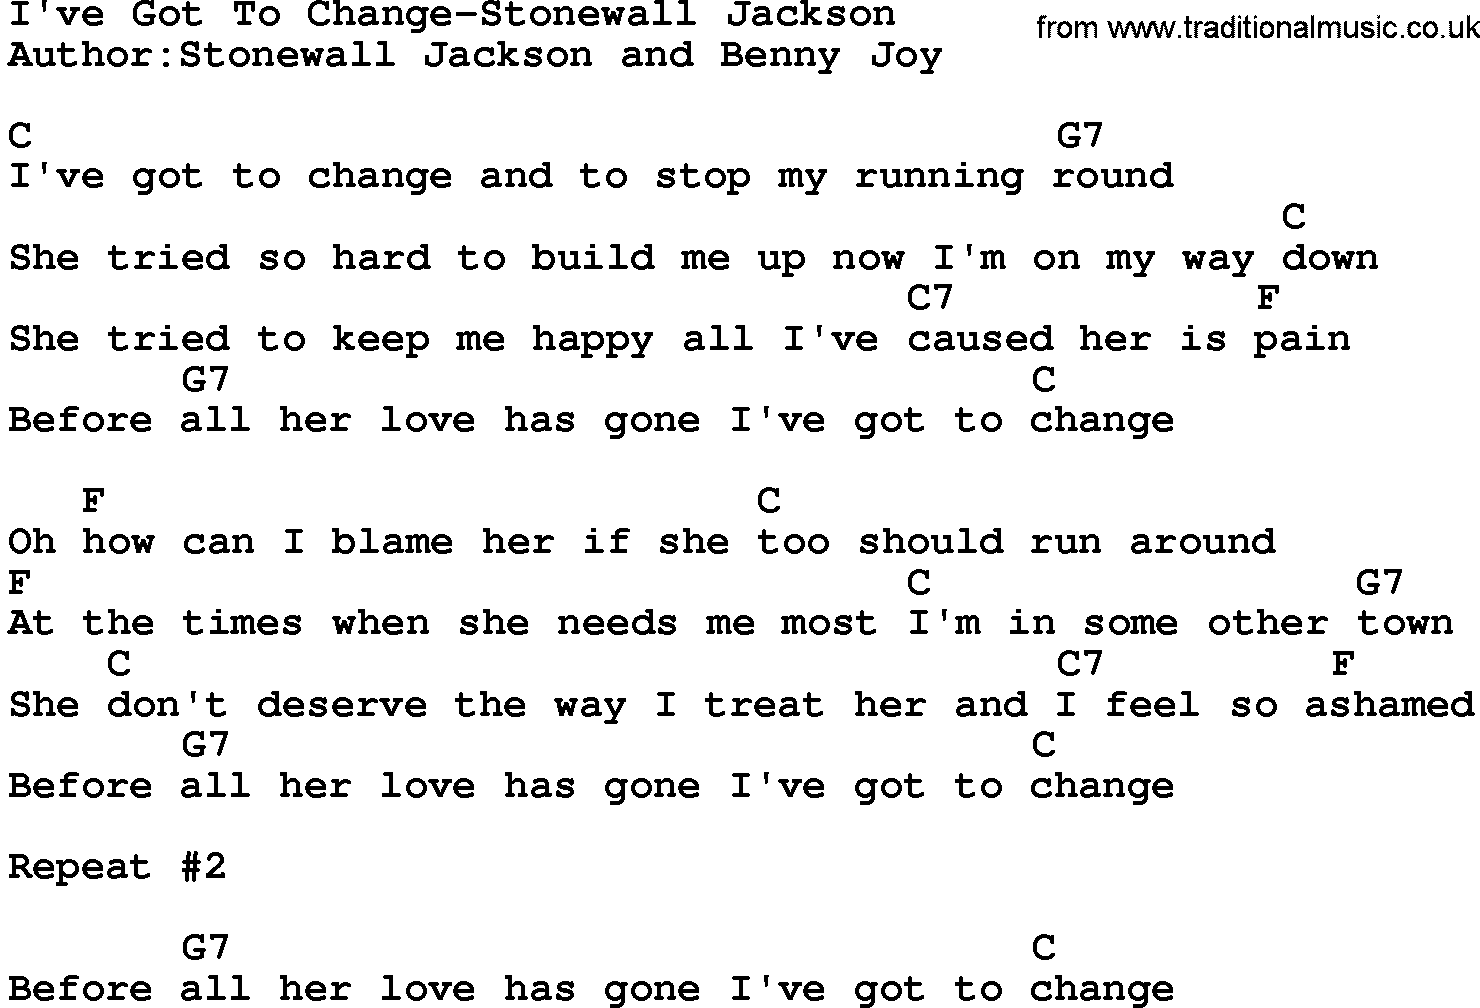 Country music song: I've Got To Change-Stonewall Jackson lyrics and chords